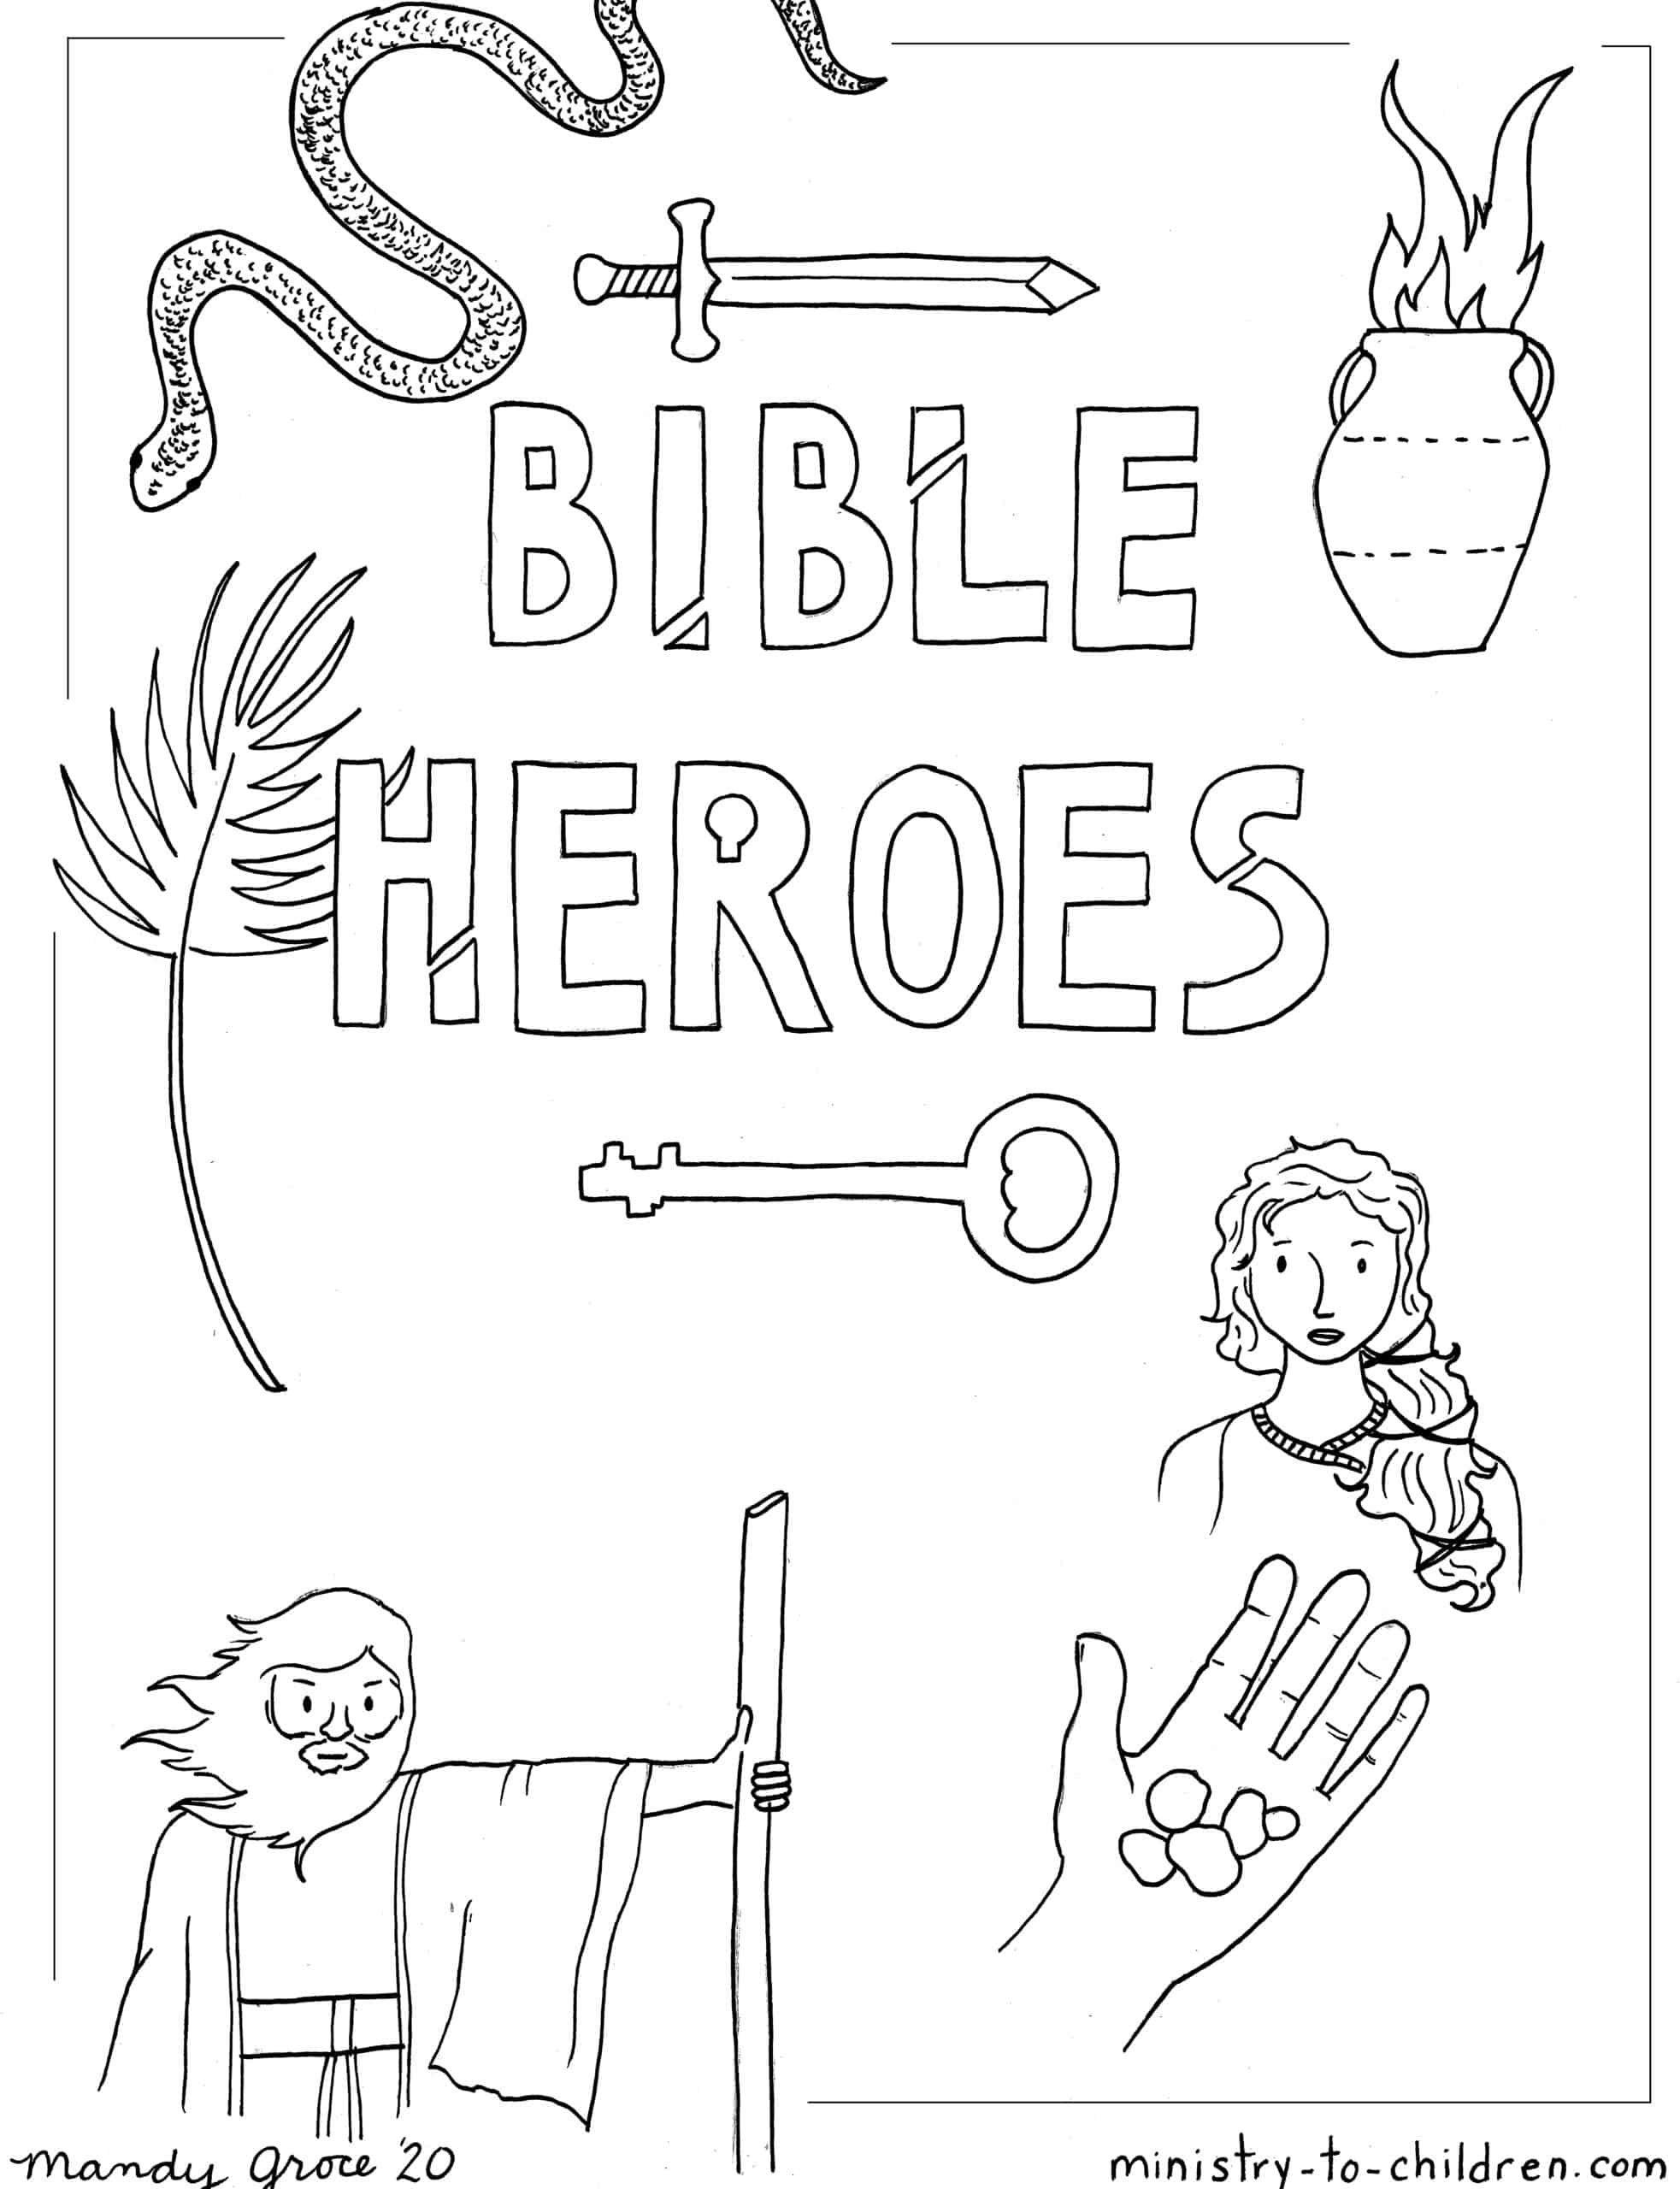 Bible Heroes Coloring Page - Ministry-To-Children regarding Free Printable Bible Characters Coloring Pages